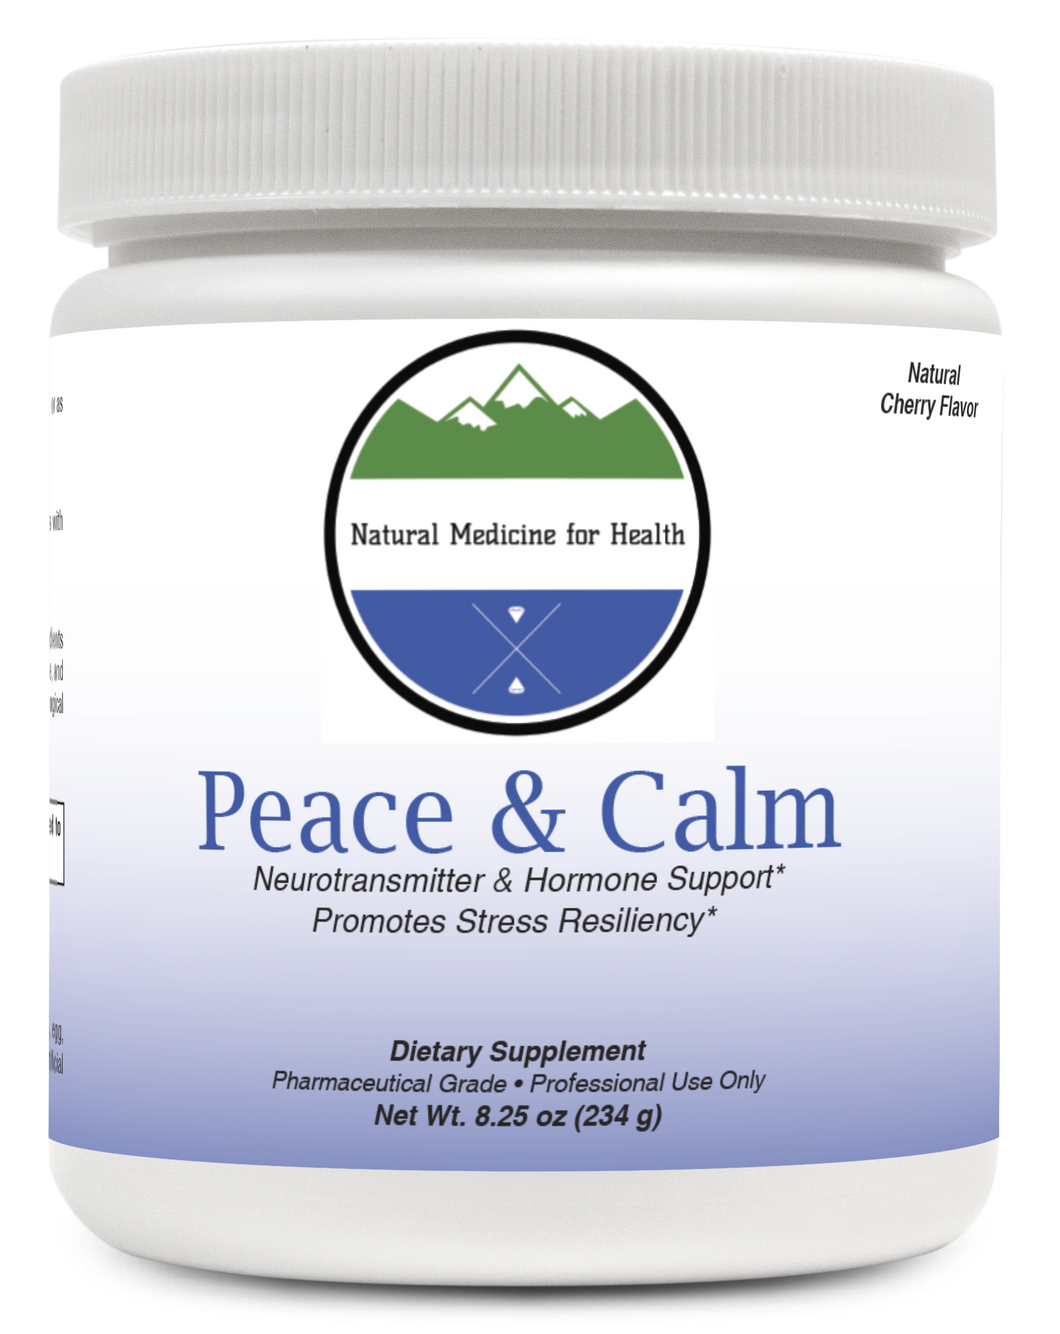 Natural Medicine for Health, Peace & Calm Natural Cherry Flavor 234g